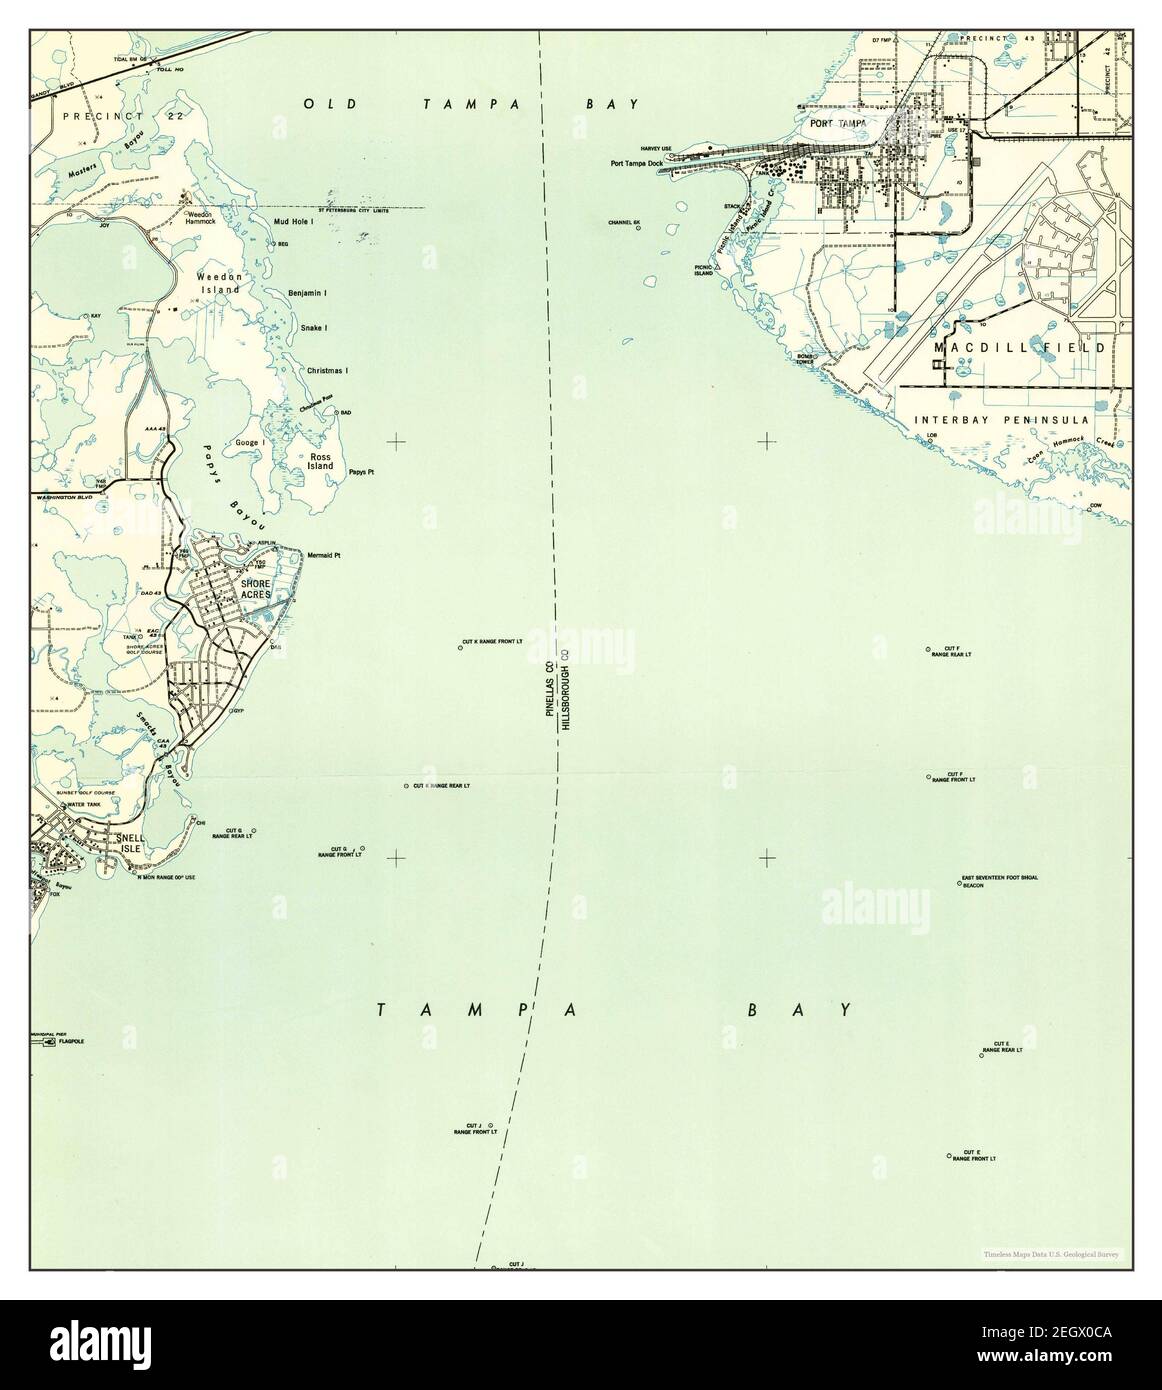 Port Tampa, Florida, map 1947, 1:24000, United States of America by Timeless Maps, data U.S. Geological Survey Stock Photo